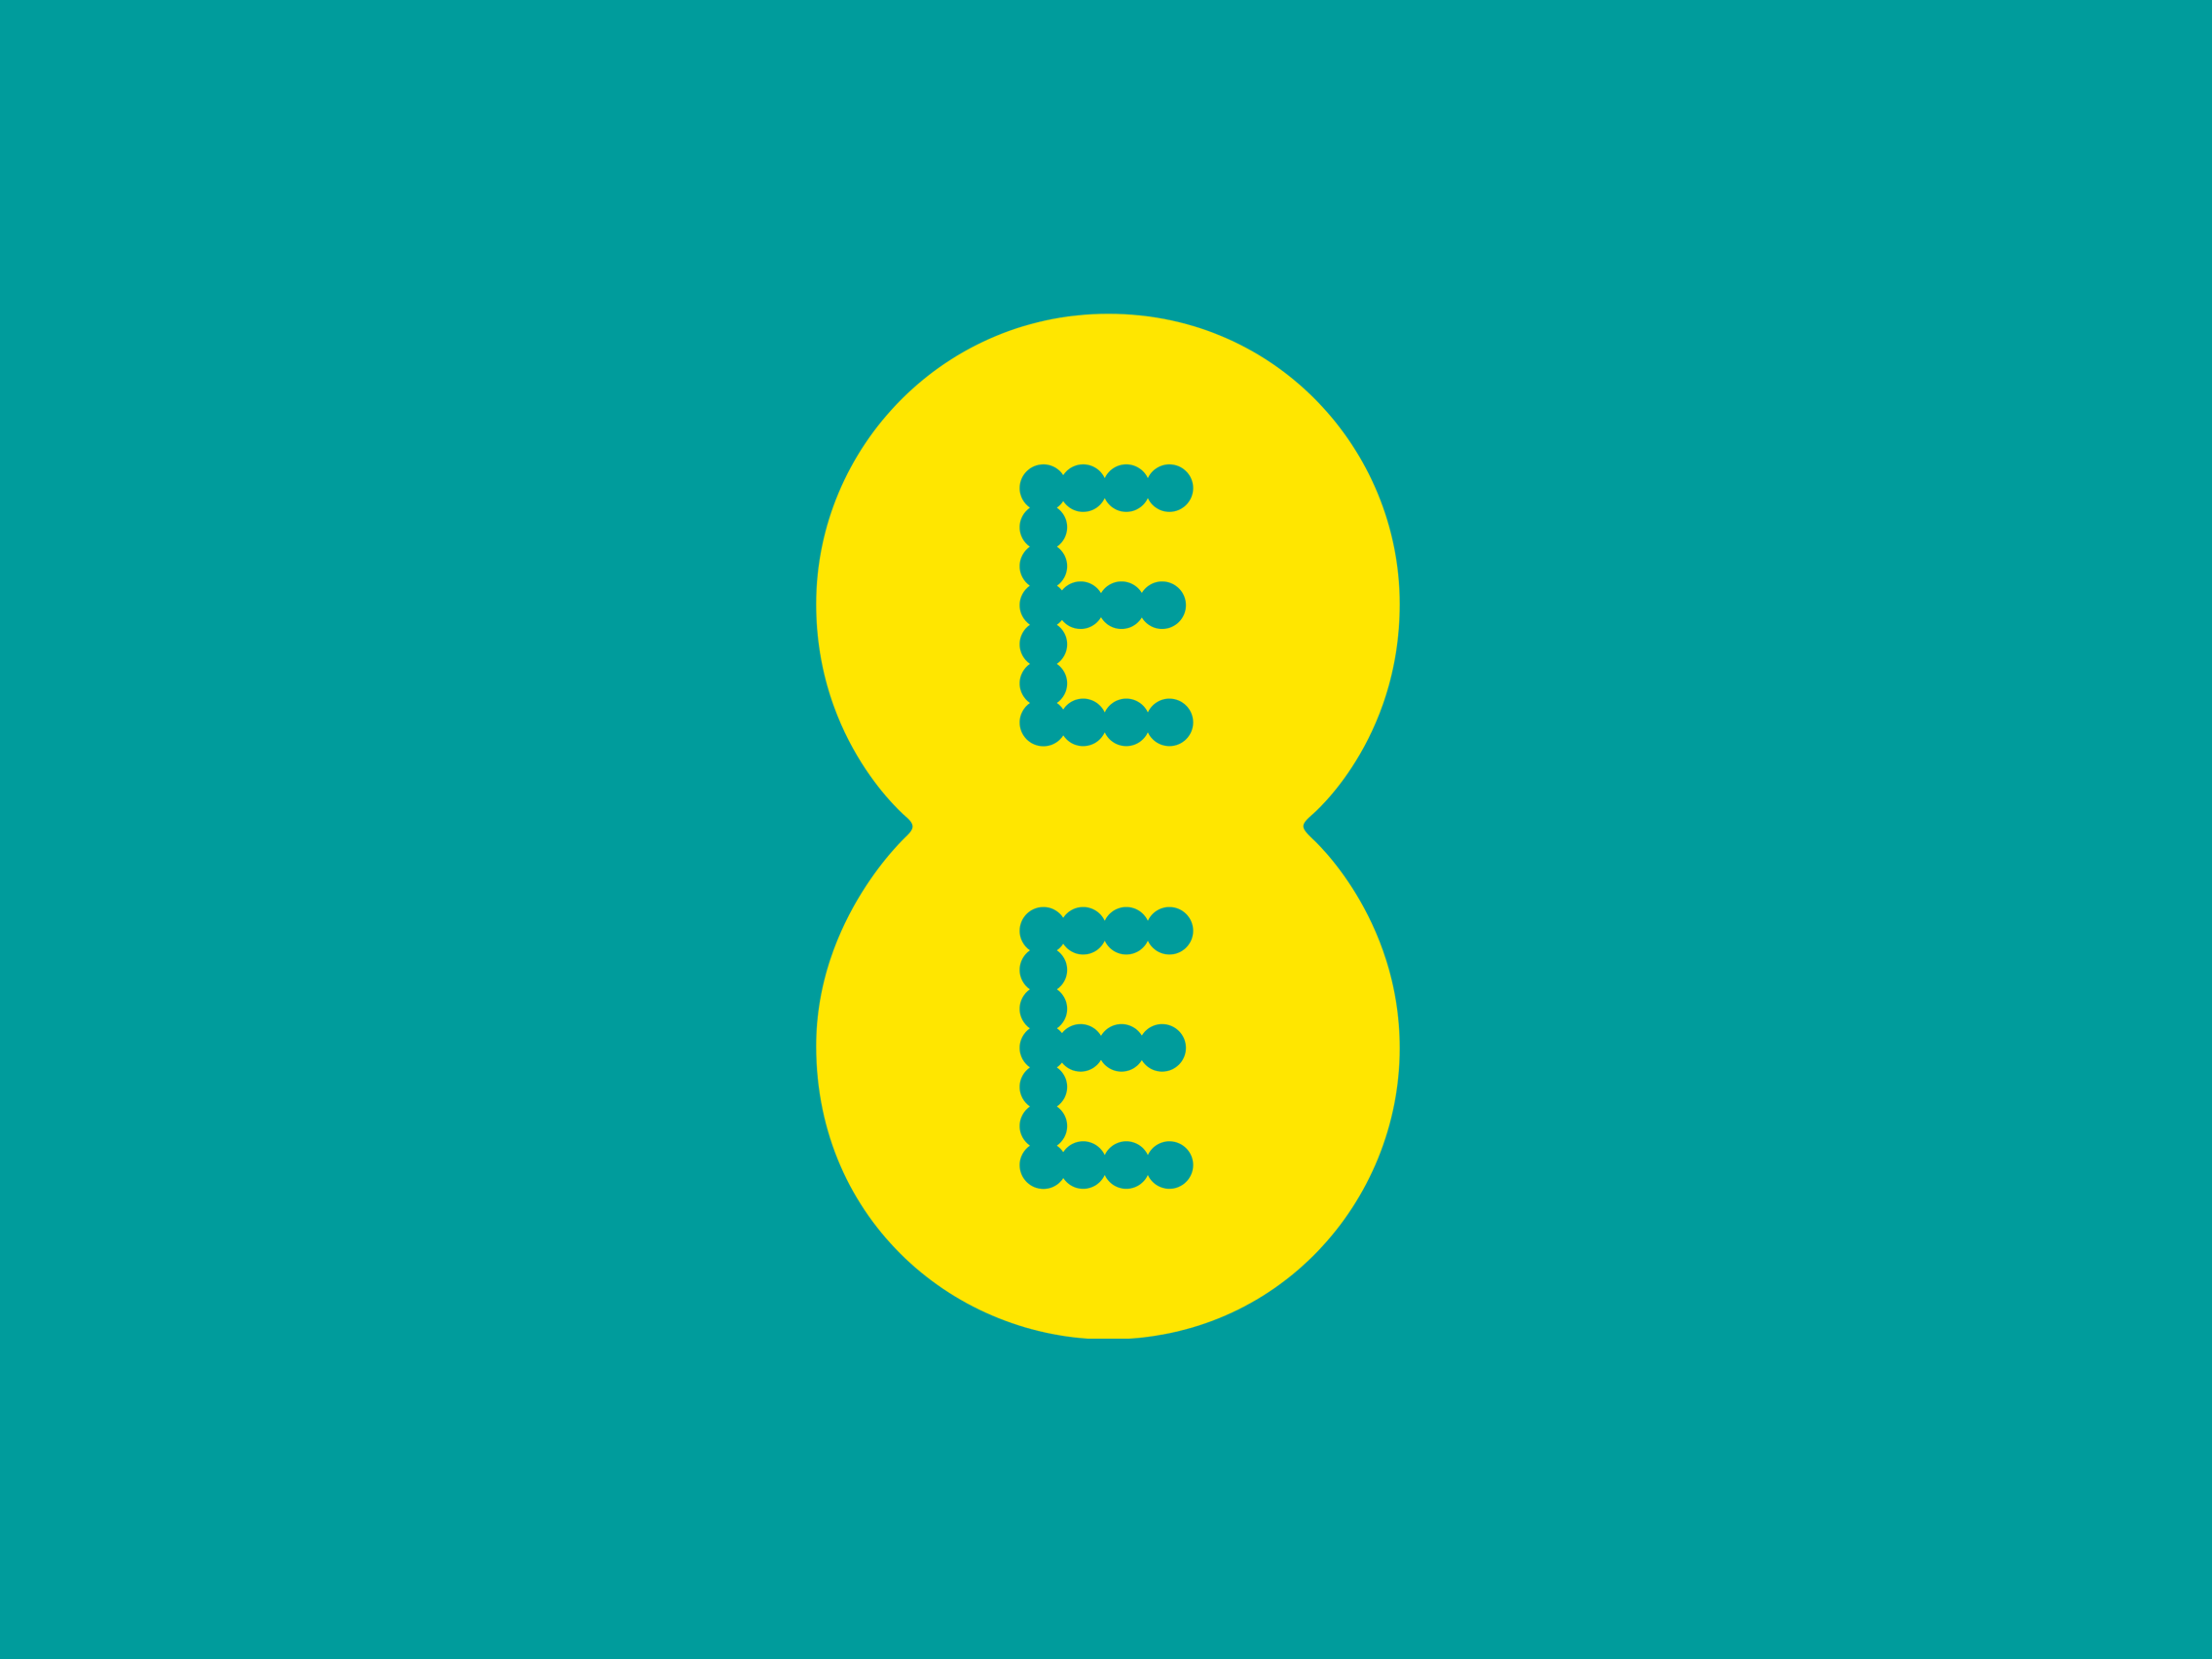 Turquoise and Yellow Logo - File:EE-logo-yellow.png - Wikimedia Commons